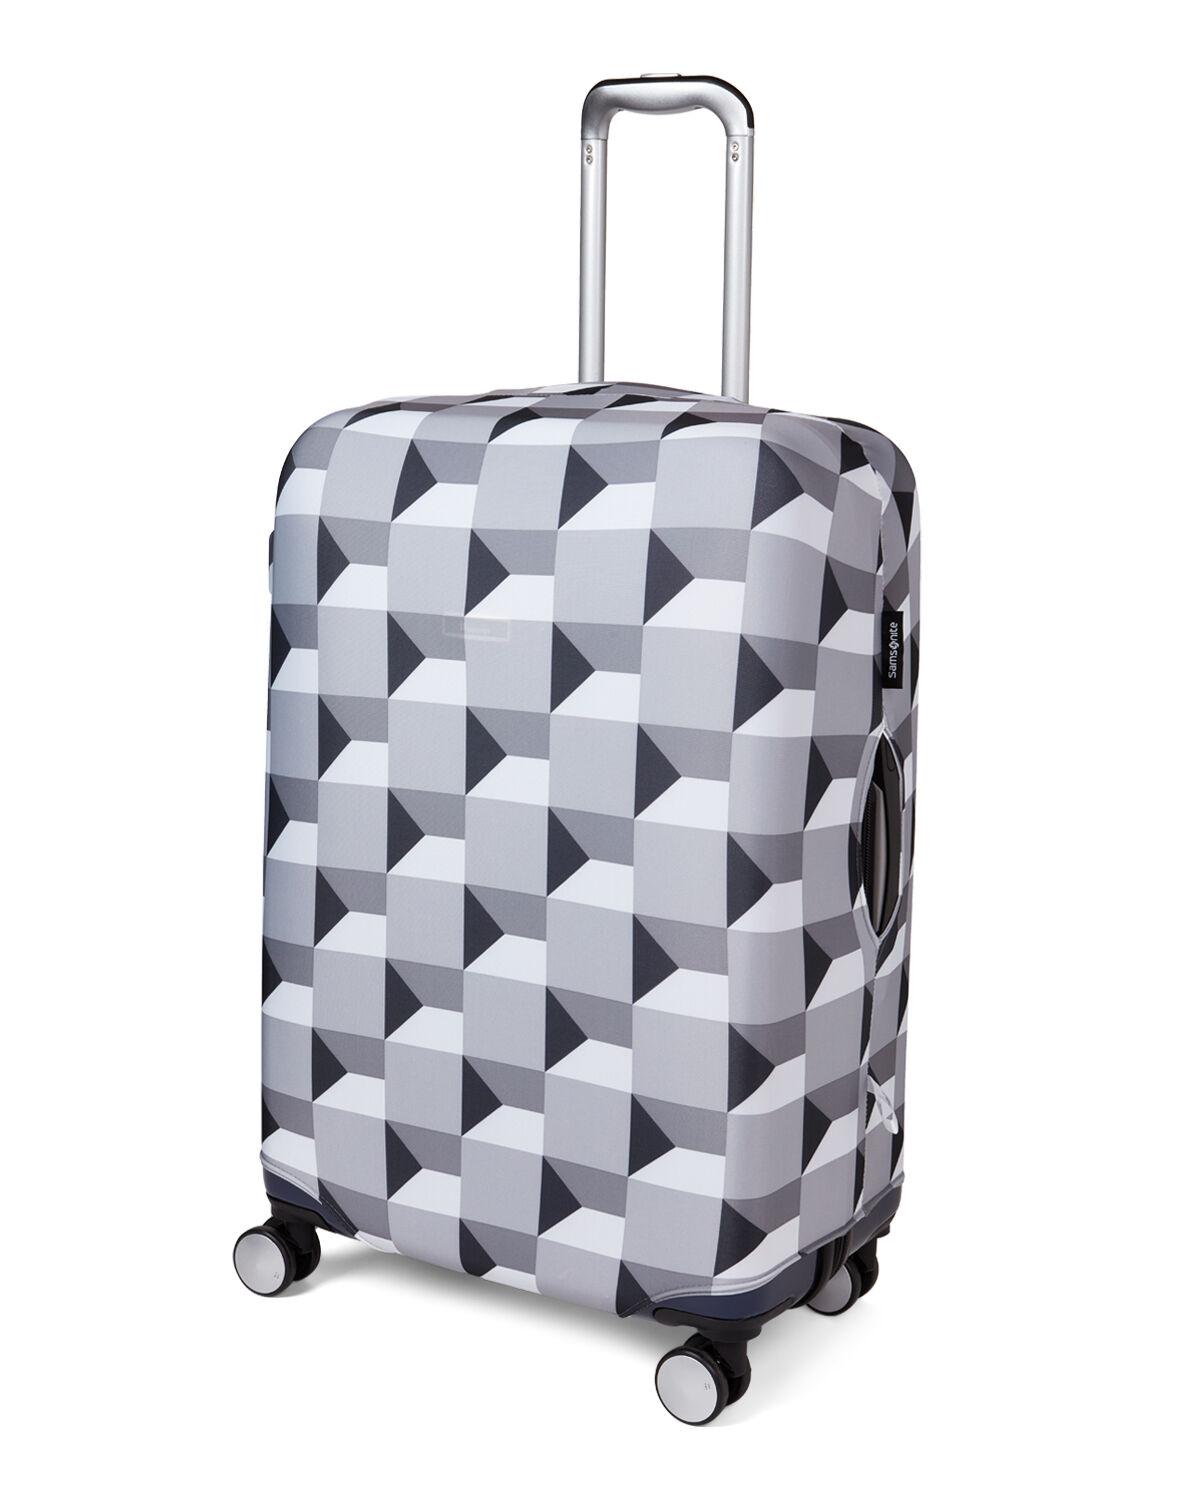  Printed Luggage Cover : Md - Infinity Grey